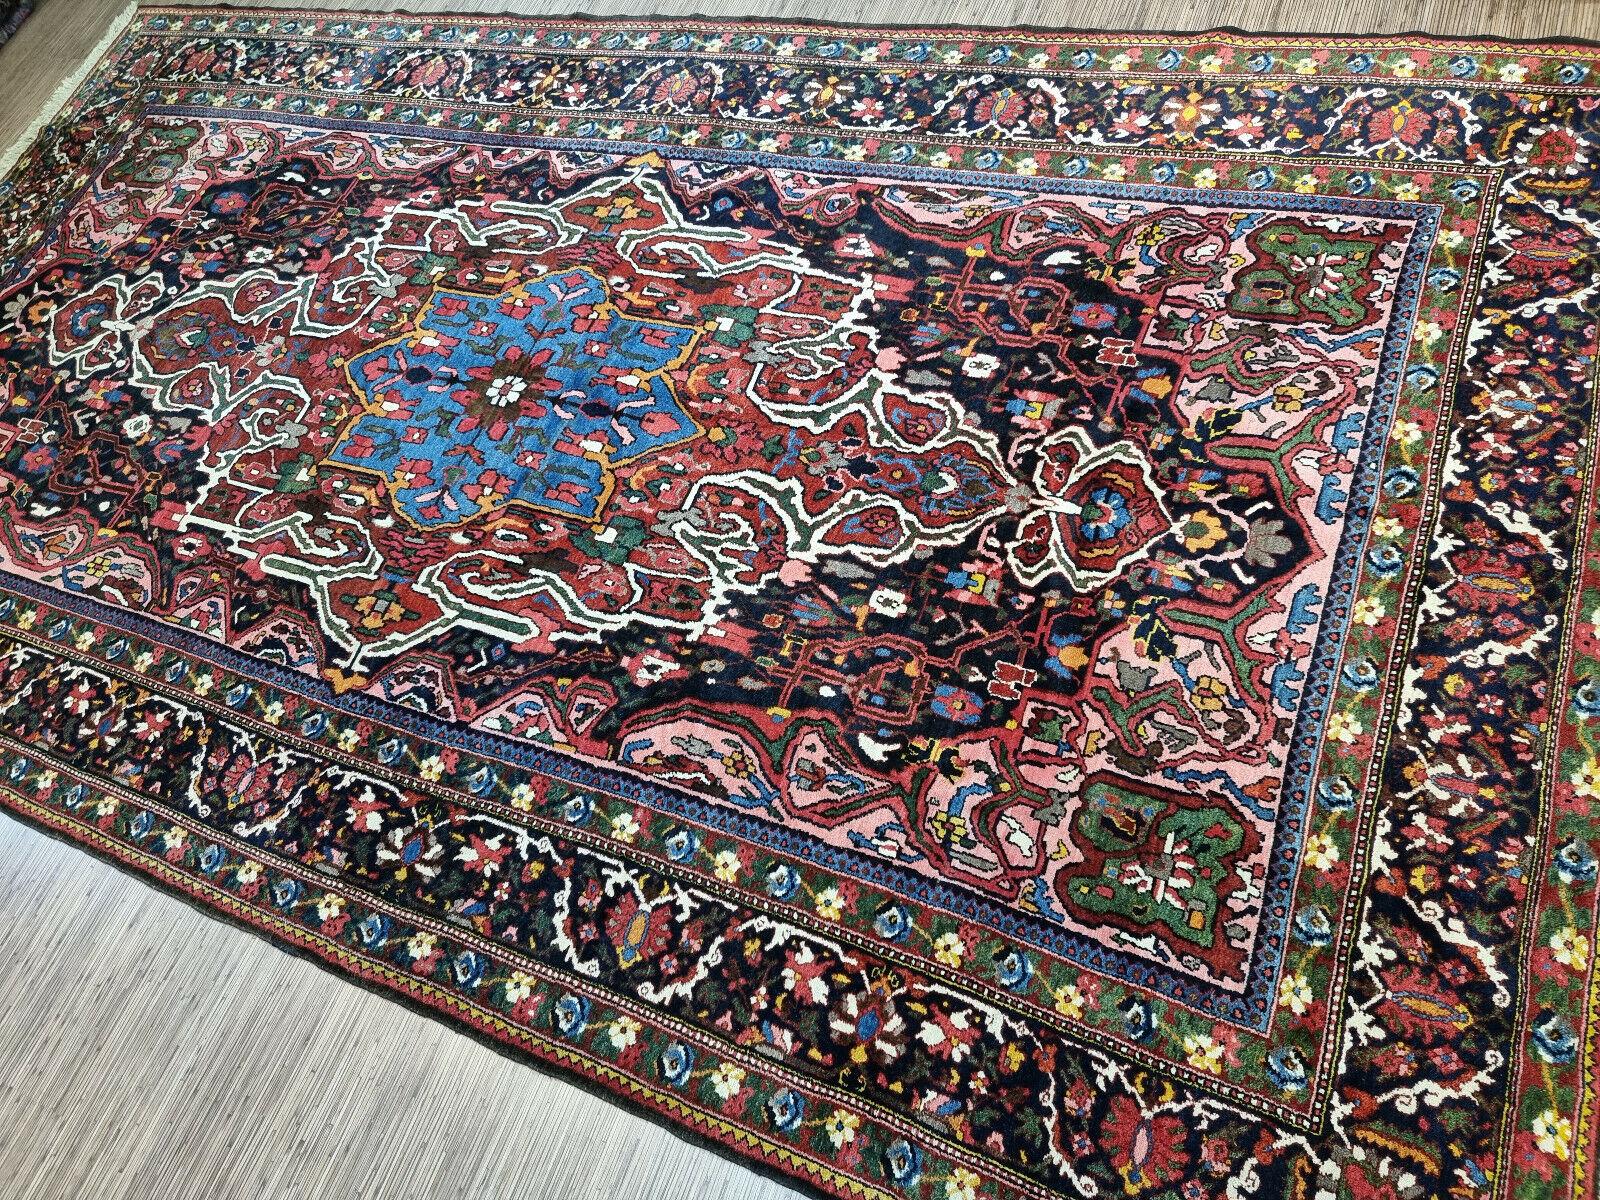 Handmade Antique Persian Style Bakhtiari Rug

Add a touch of history and artistry to your home with this stunning handmade antique Persian style Bakhtiari rug. This exquisite piece measures 7.2’ x 13.2’ and dates back to the 1920s, but is still in